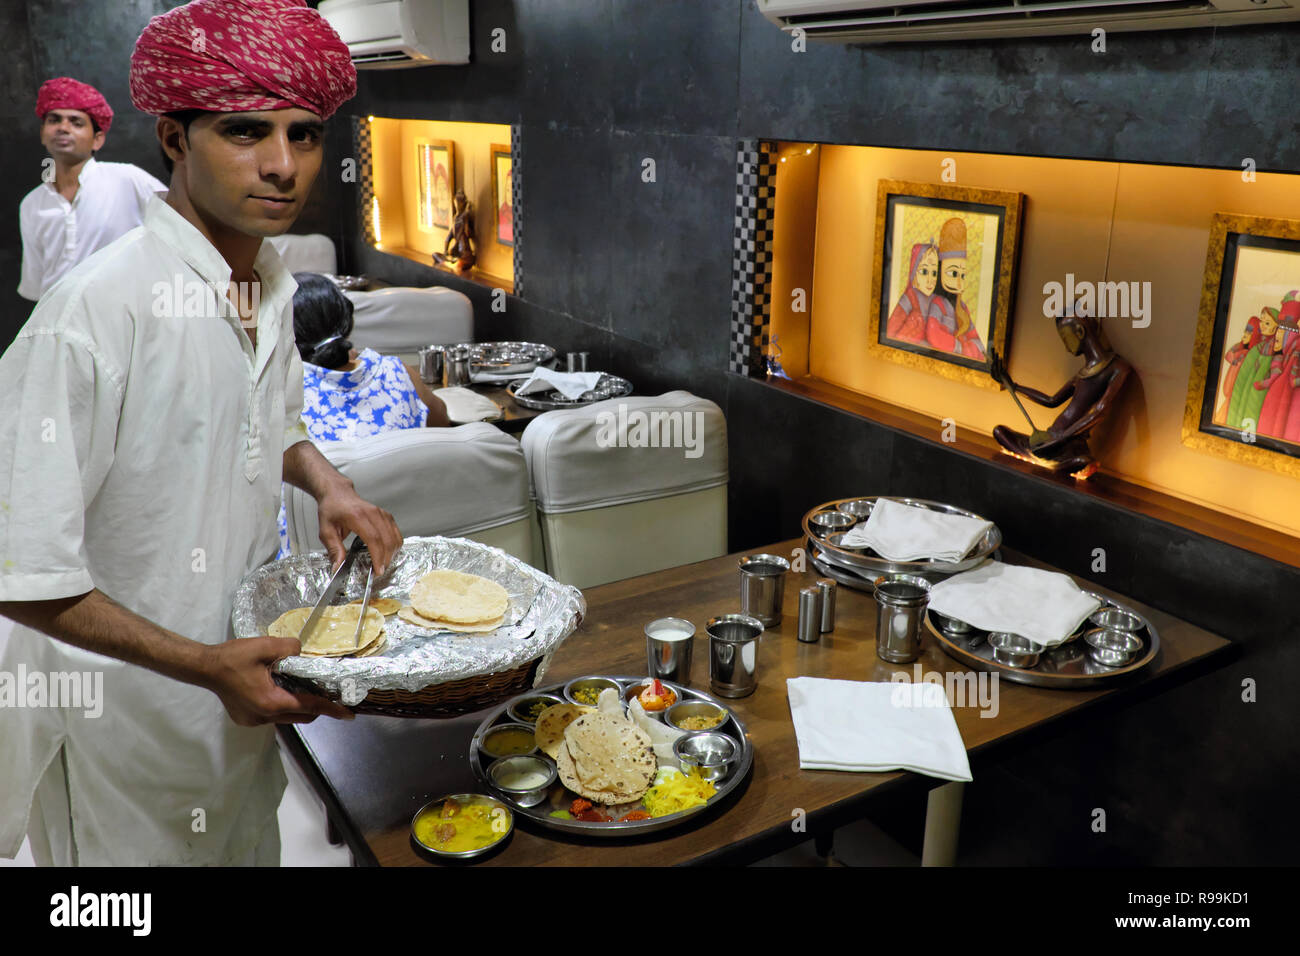 A waiter at Golden Star Rajasthani restaurant in Mumbai, fittingly clad in ethnic dress, serves the food on a traditional round metal plate or thali Stock Photo